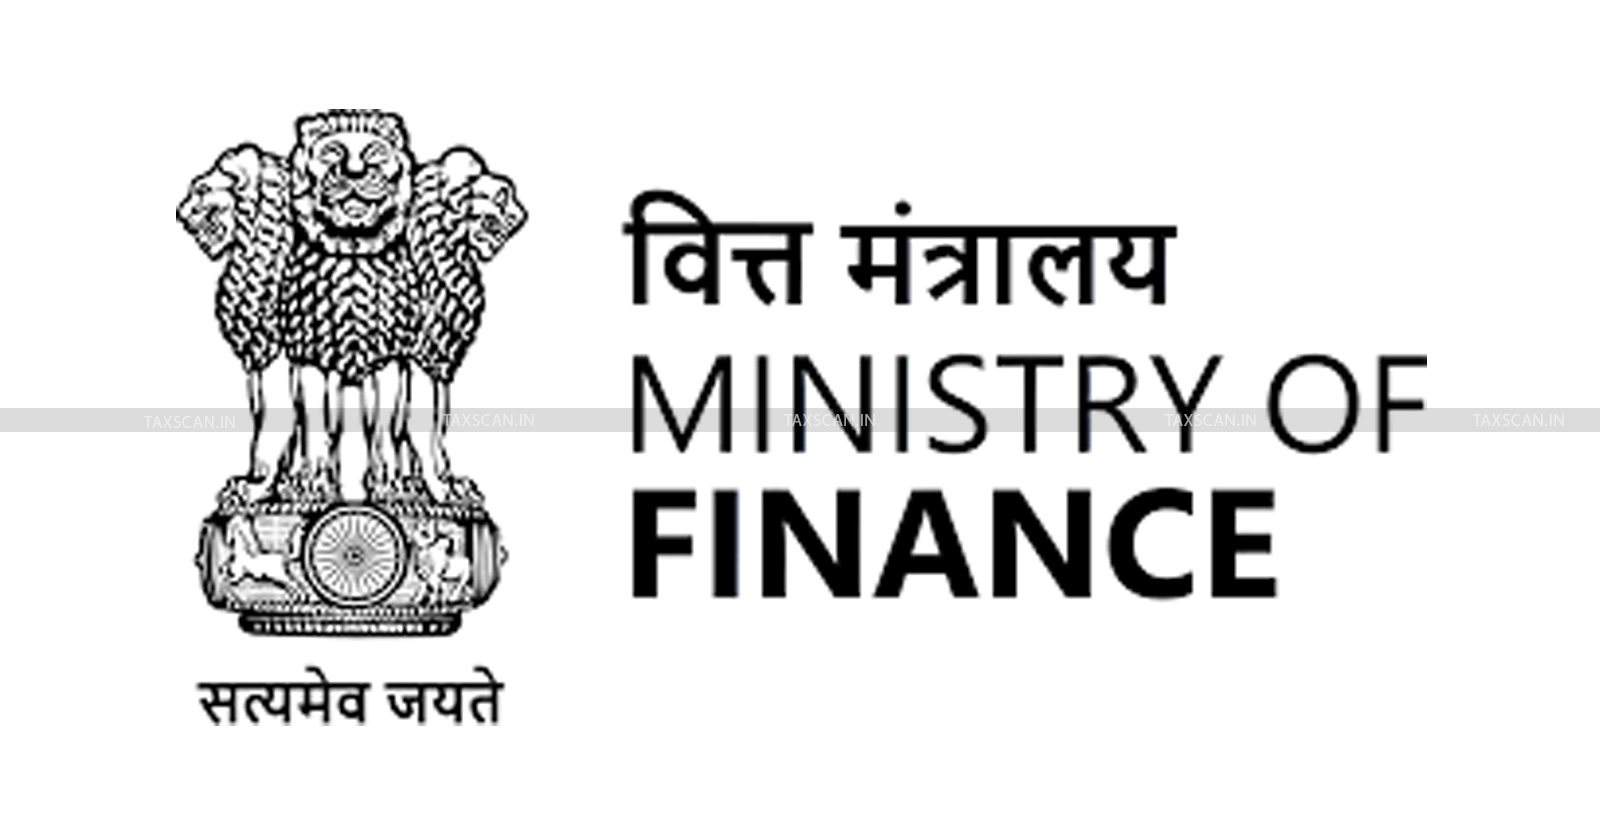 Finance Ministry Accessibility Standards - Banking Compliance with Disabilities Act - TAXSCAN